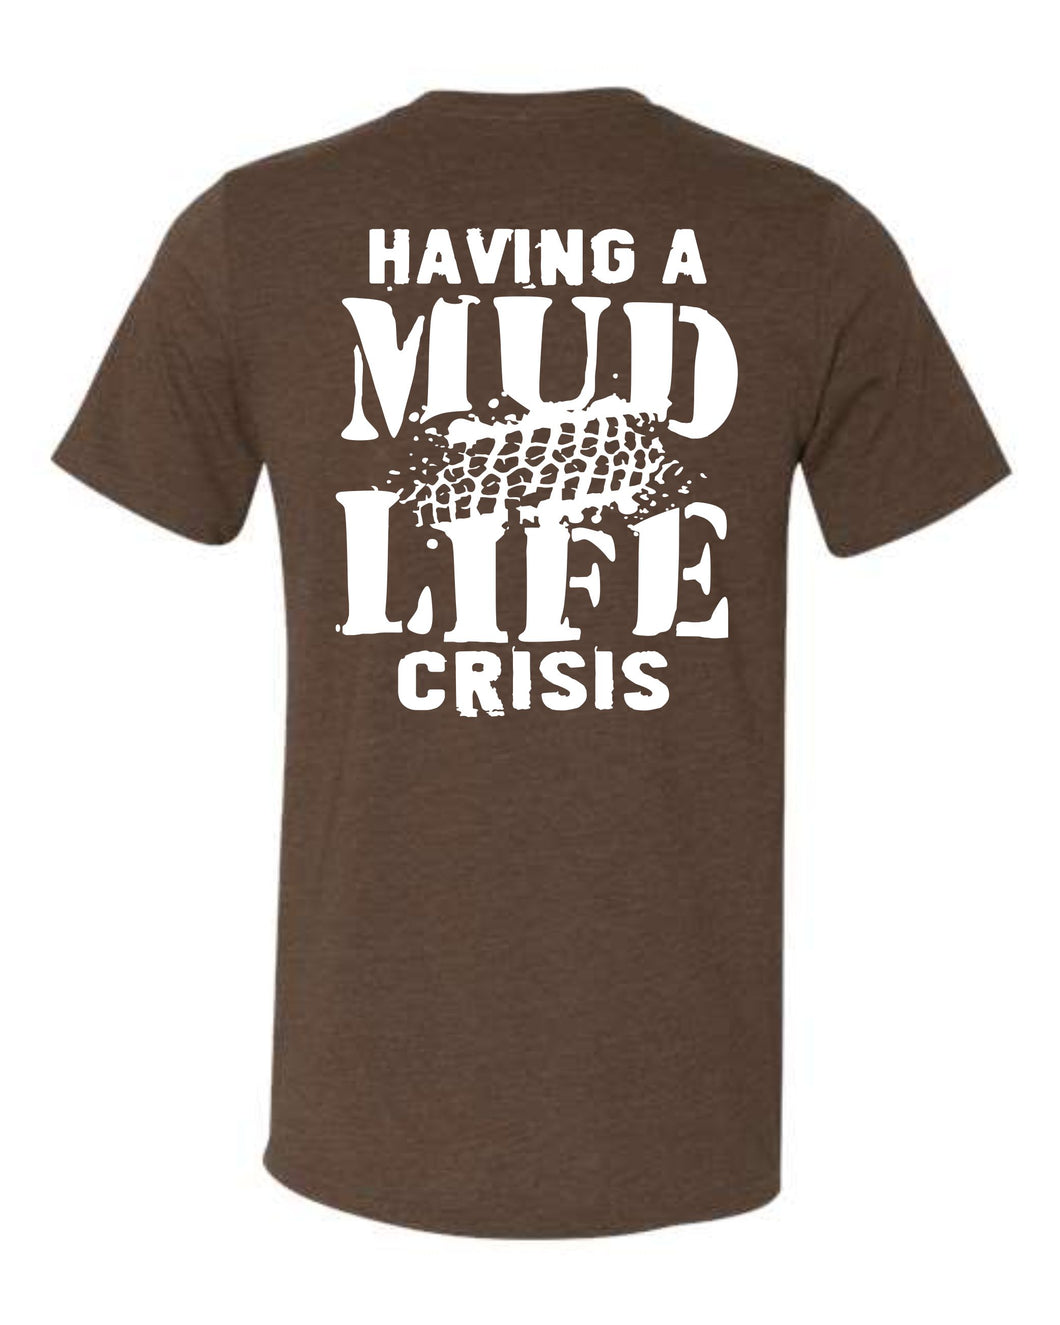 441 - Having a Mud Life Crisis (Back Only)